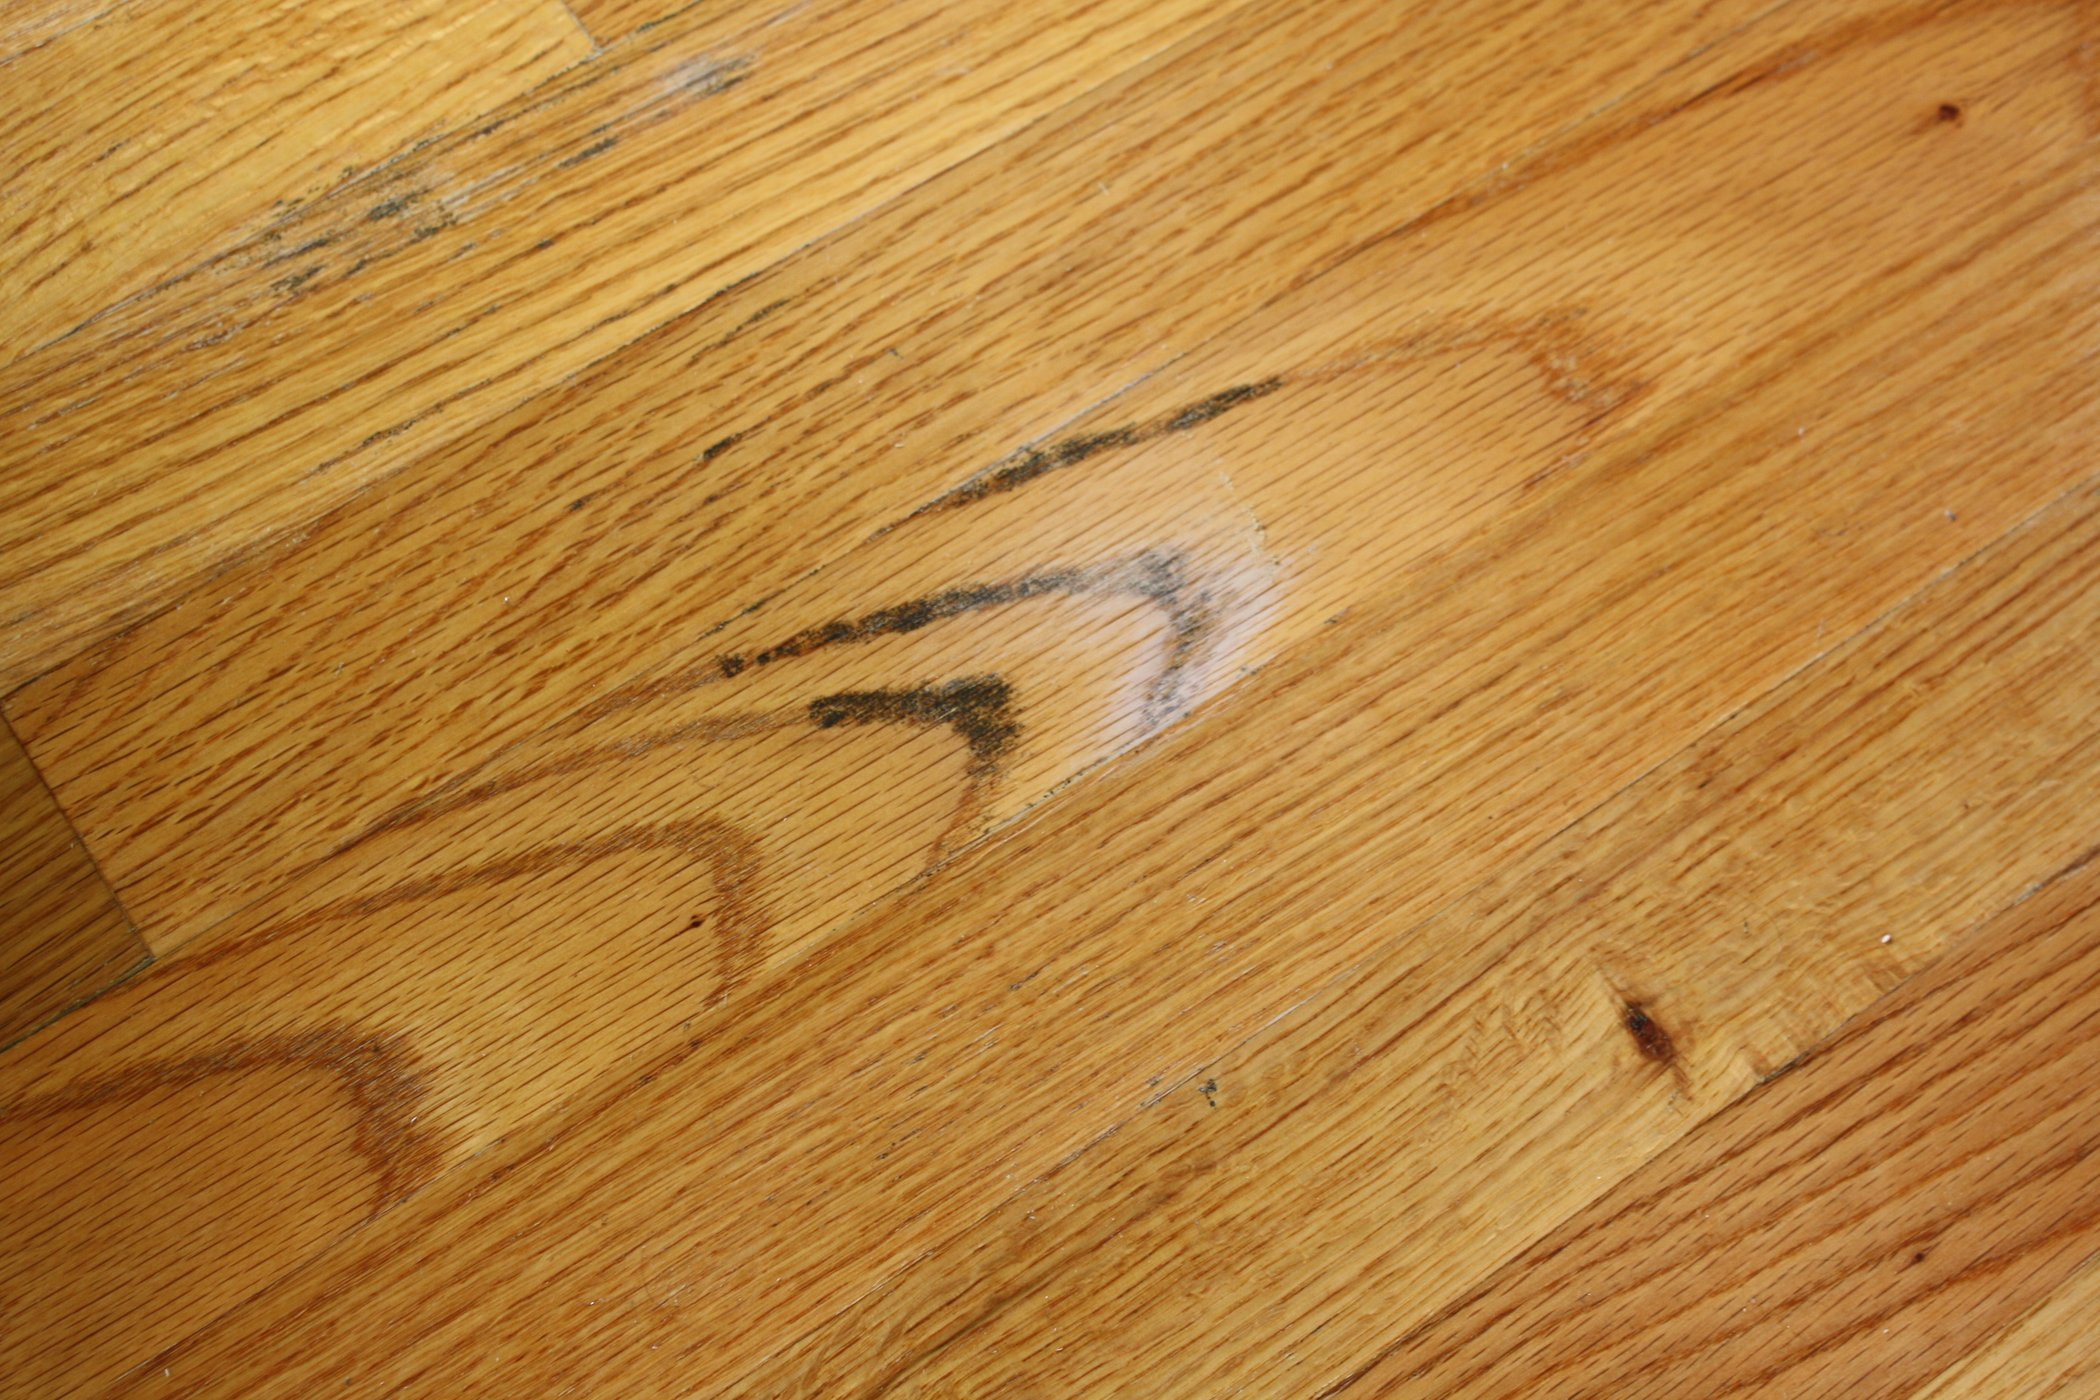 17 Lovable Hardwood Floor Stain Not Drying 2022 free download hardwood floor stain not drying of how to clean mold from a wood floor 4 steps inside fylcmqyg7dyp6ds